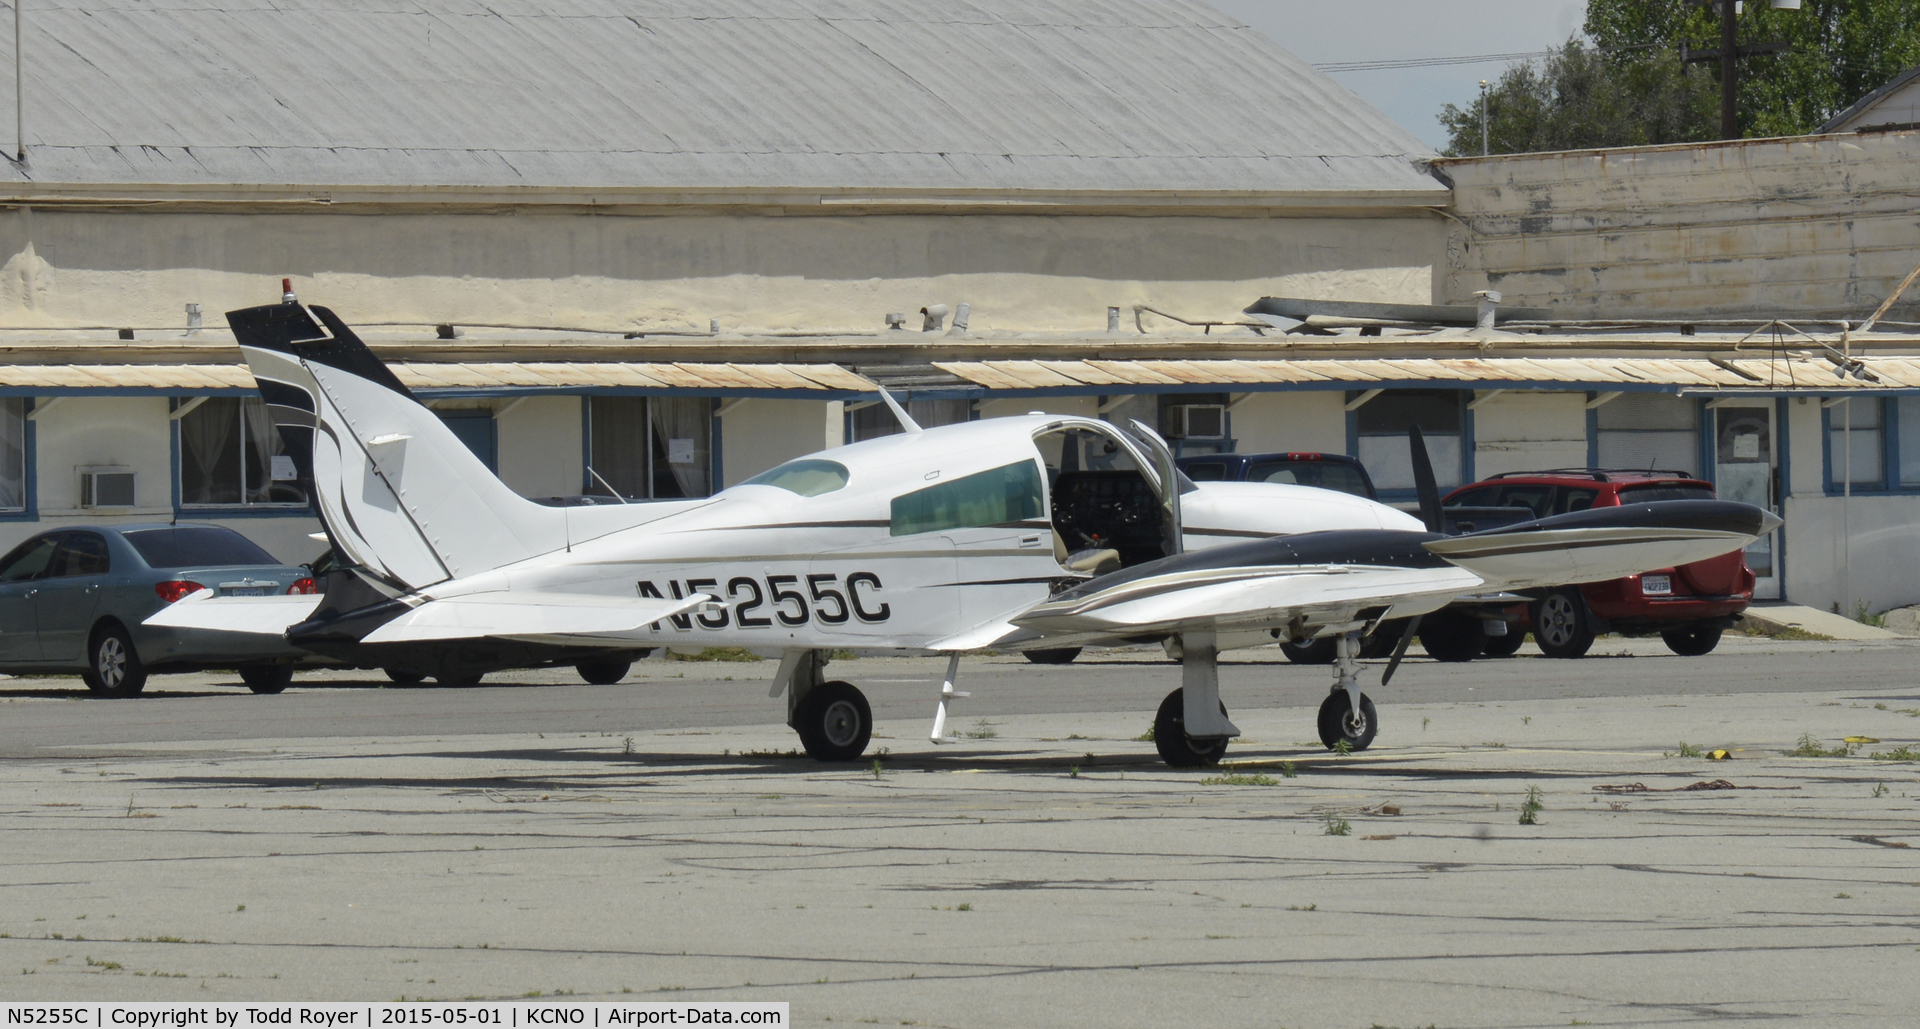 N5255C, 1978 Cessna T310R C/N 310R1528, Parked at Chino